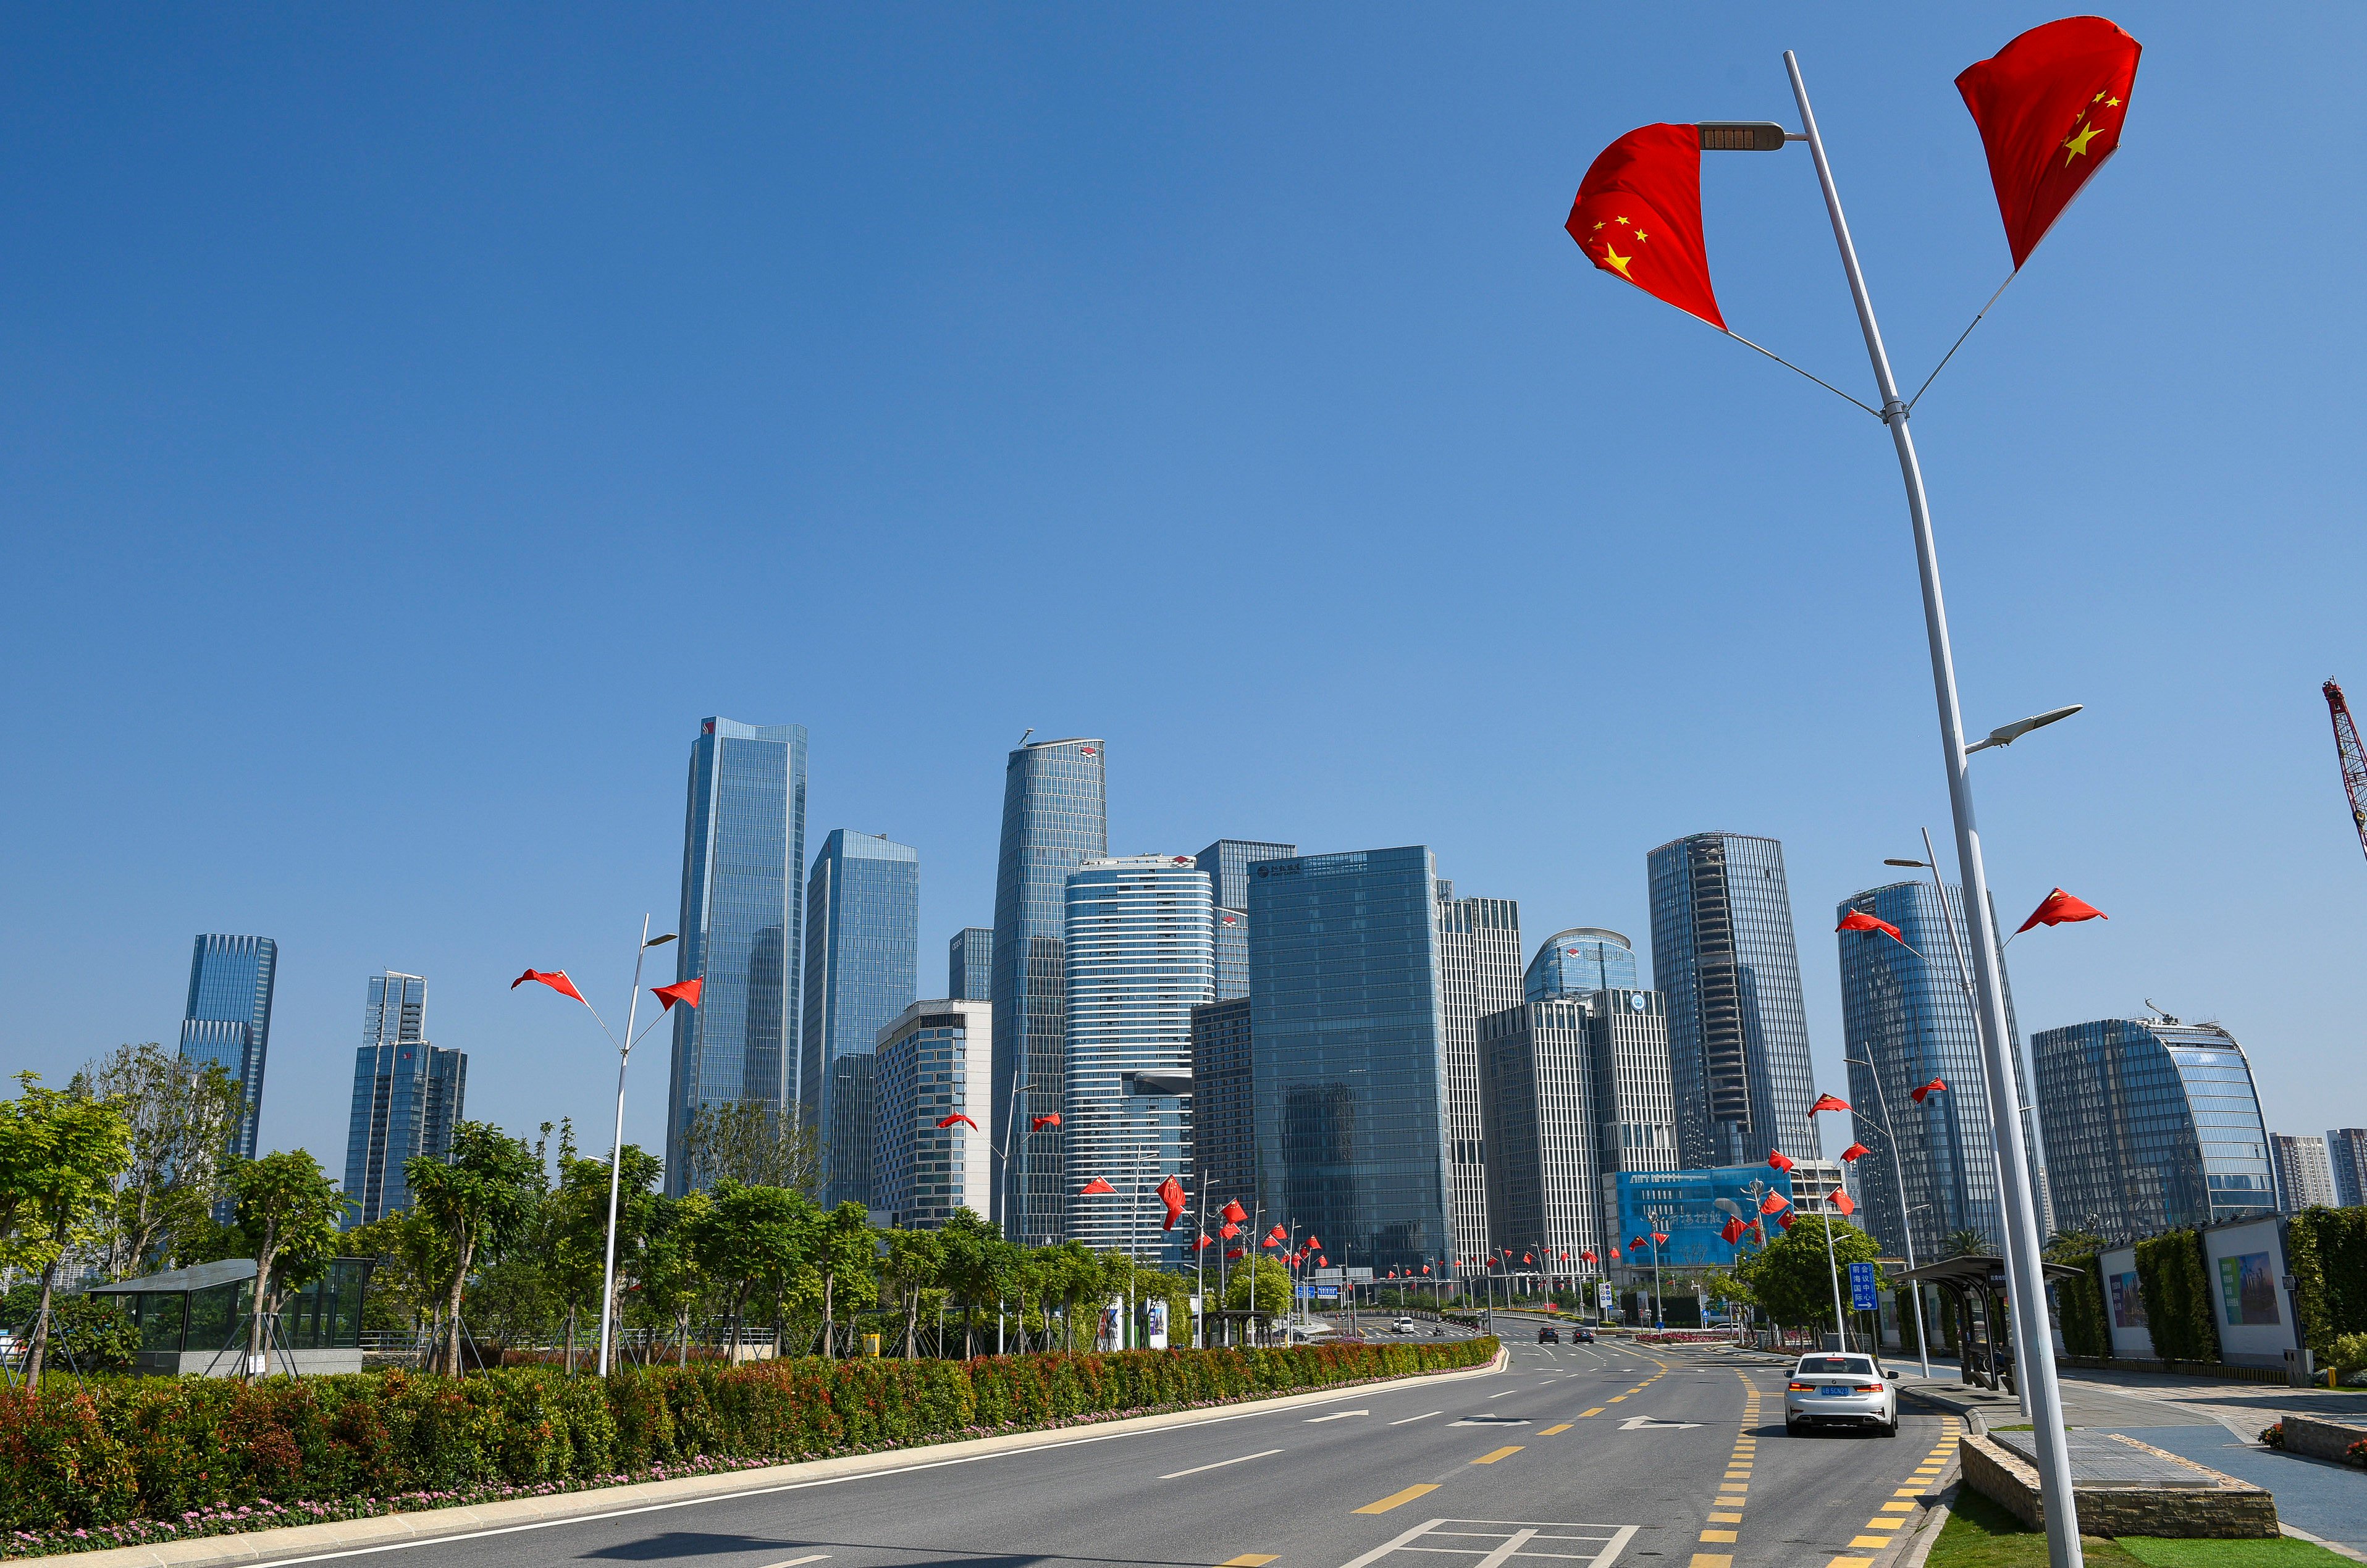 The Qianhai special economic zone in Shenzhen. Photo: Getty Images